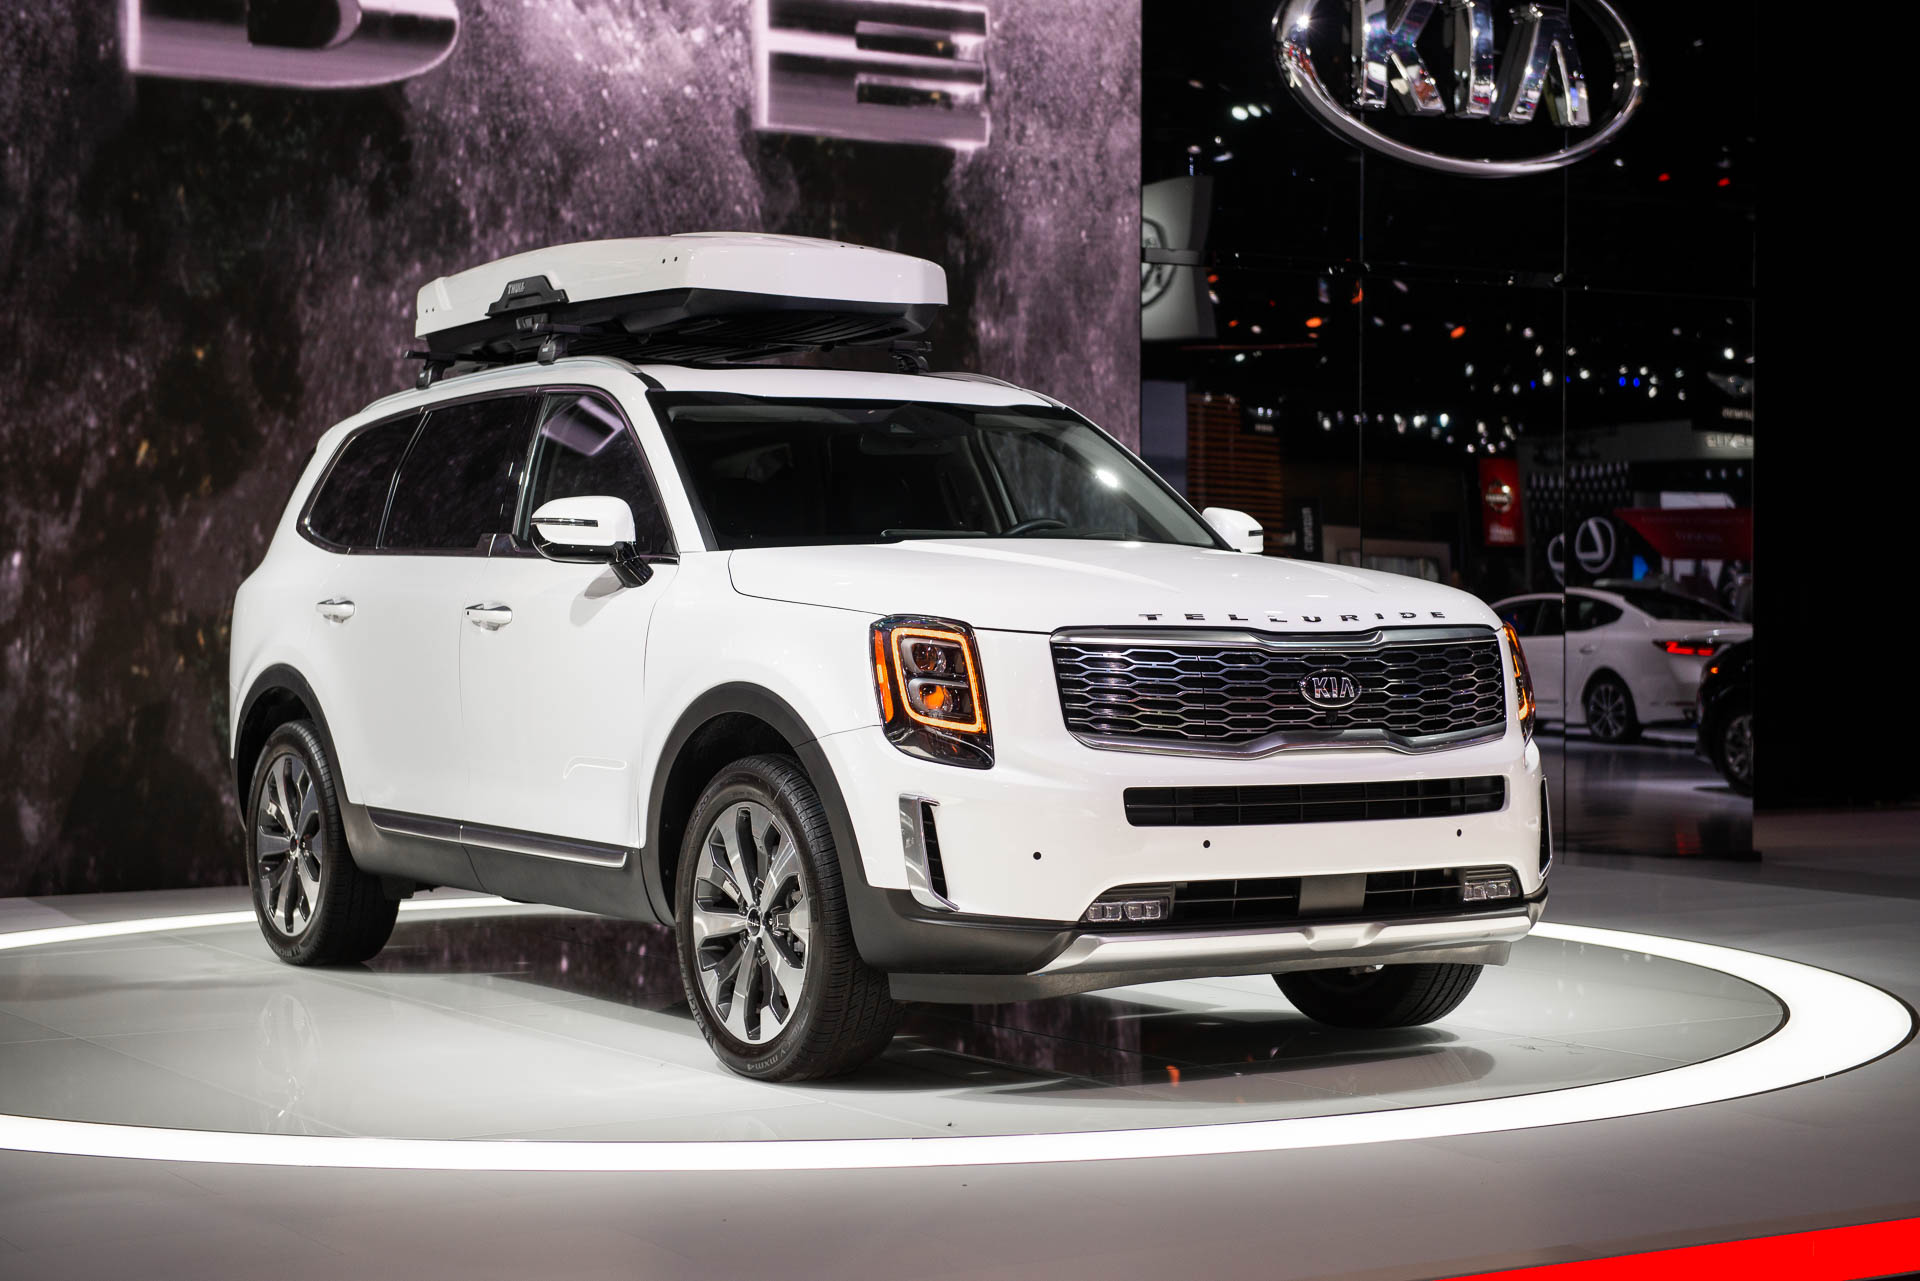 2022 Kia Telluride is a new option for the big SUV crowd